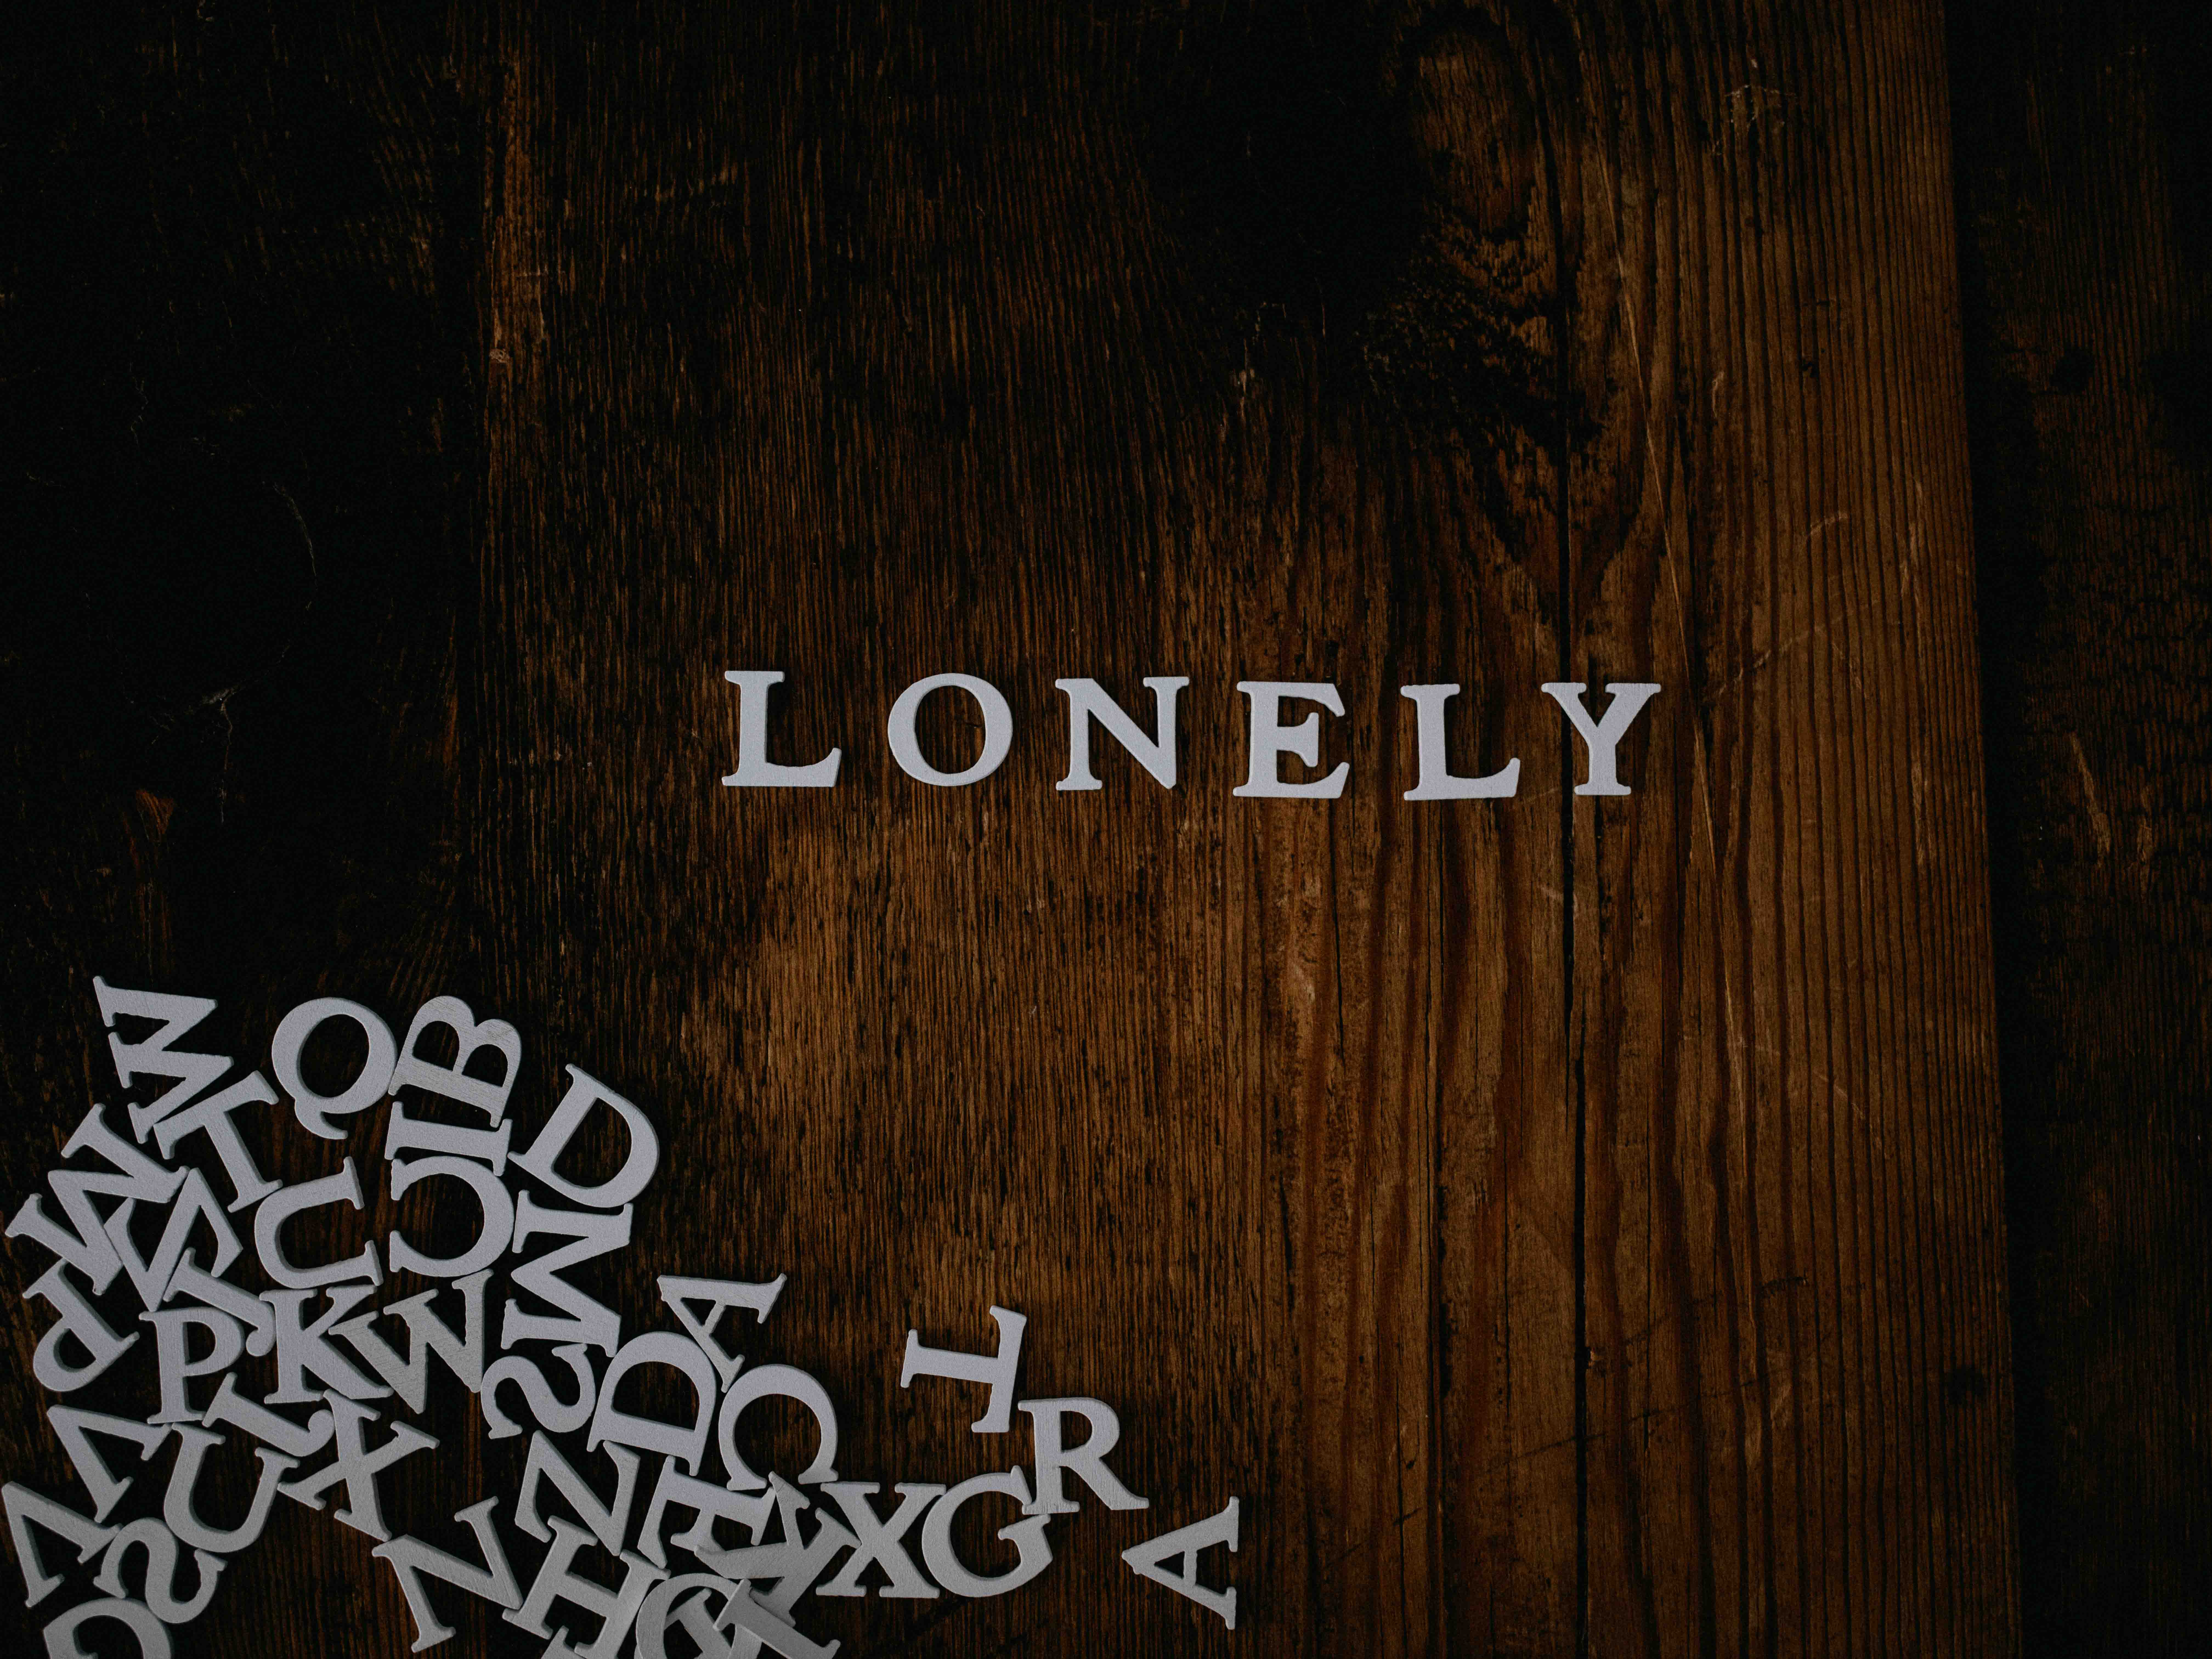 Loneliness – whose problem is it anyway?